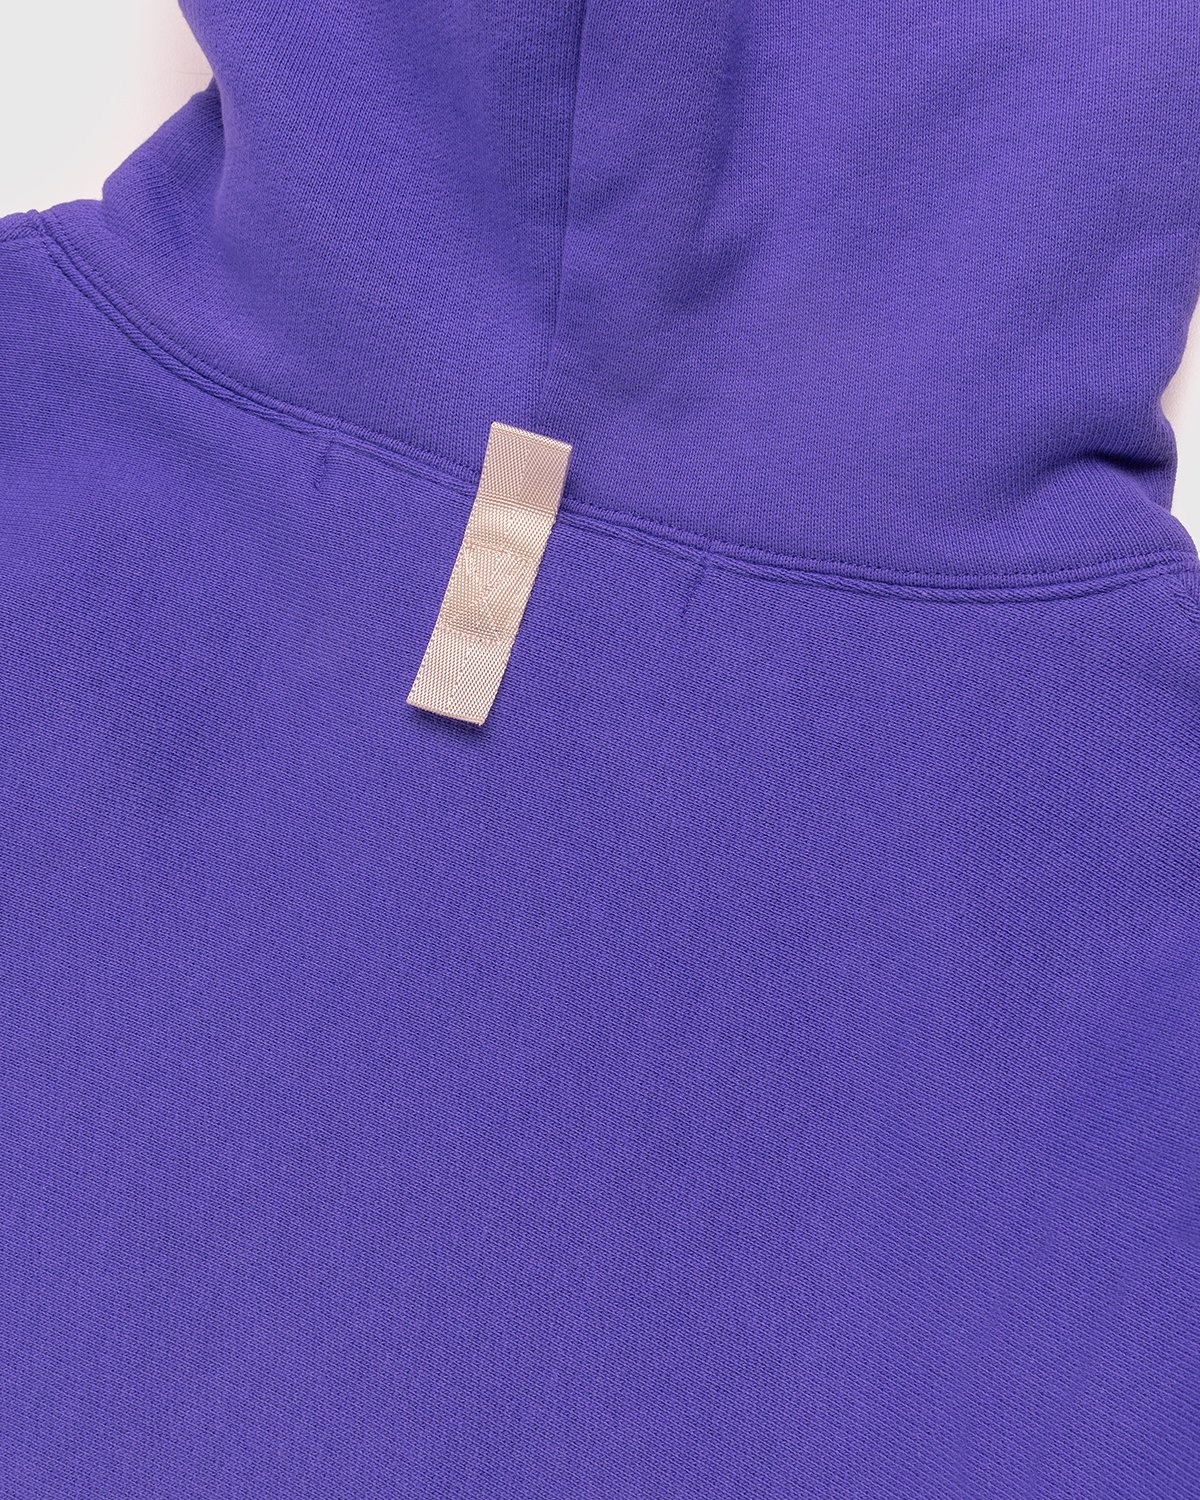 Abc. – Pullover Hoodie Sapphire - Sweats - Blue - Image 5